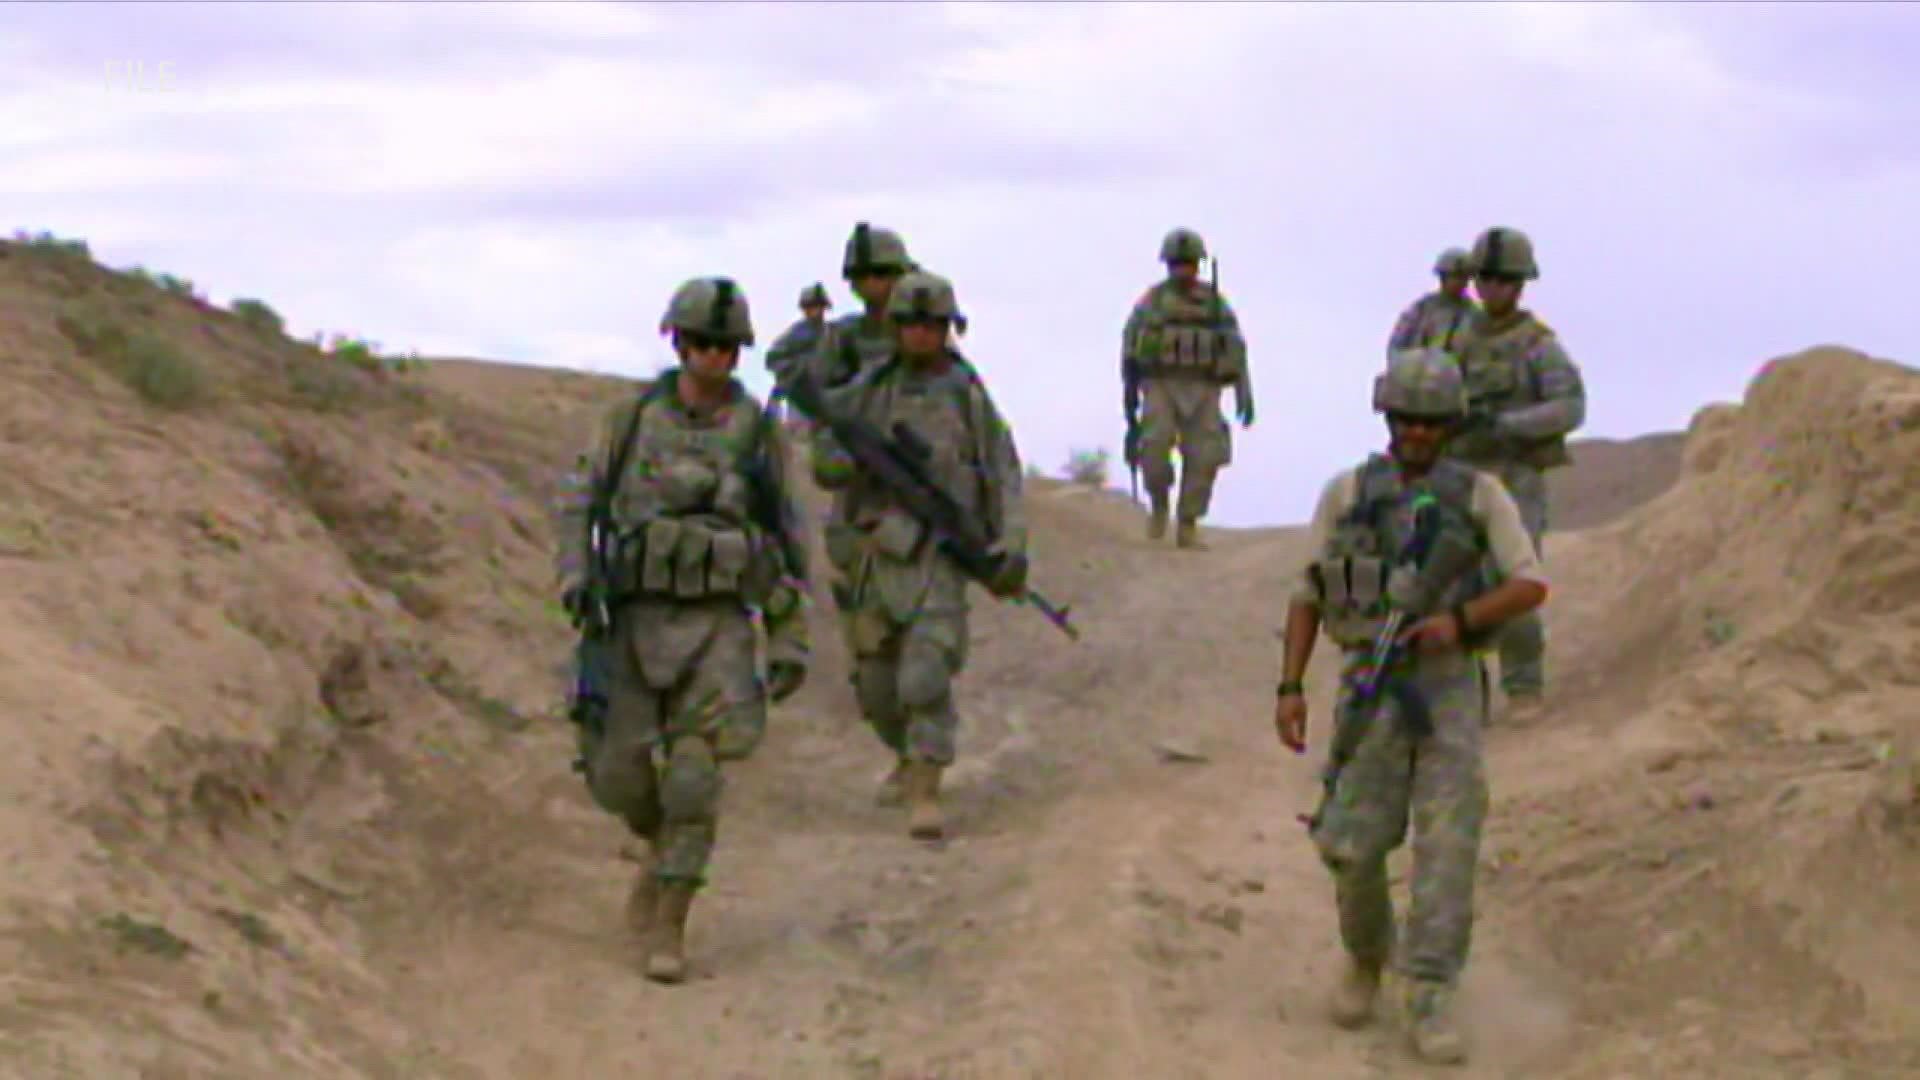 Officials say the withdrawal of U.S. troops from Afghanistan and the 20th anniversary of 9/11 can be triggering for some war veterans.